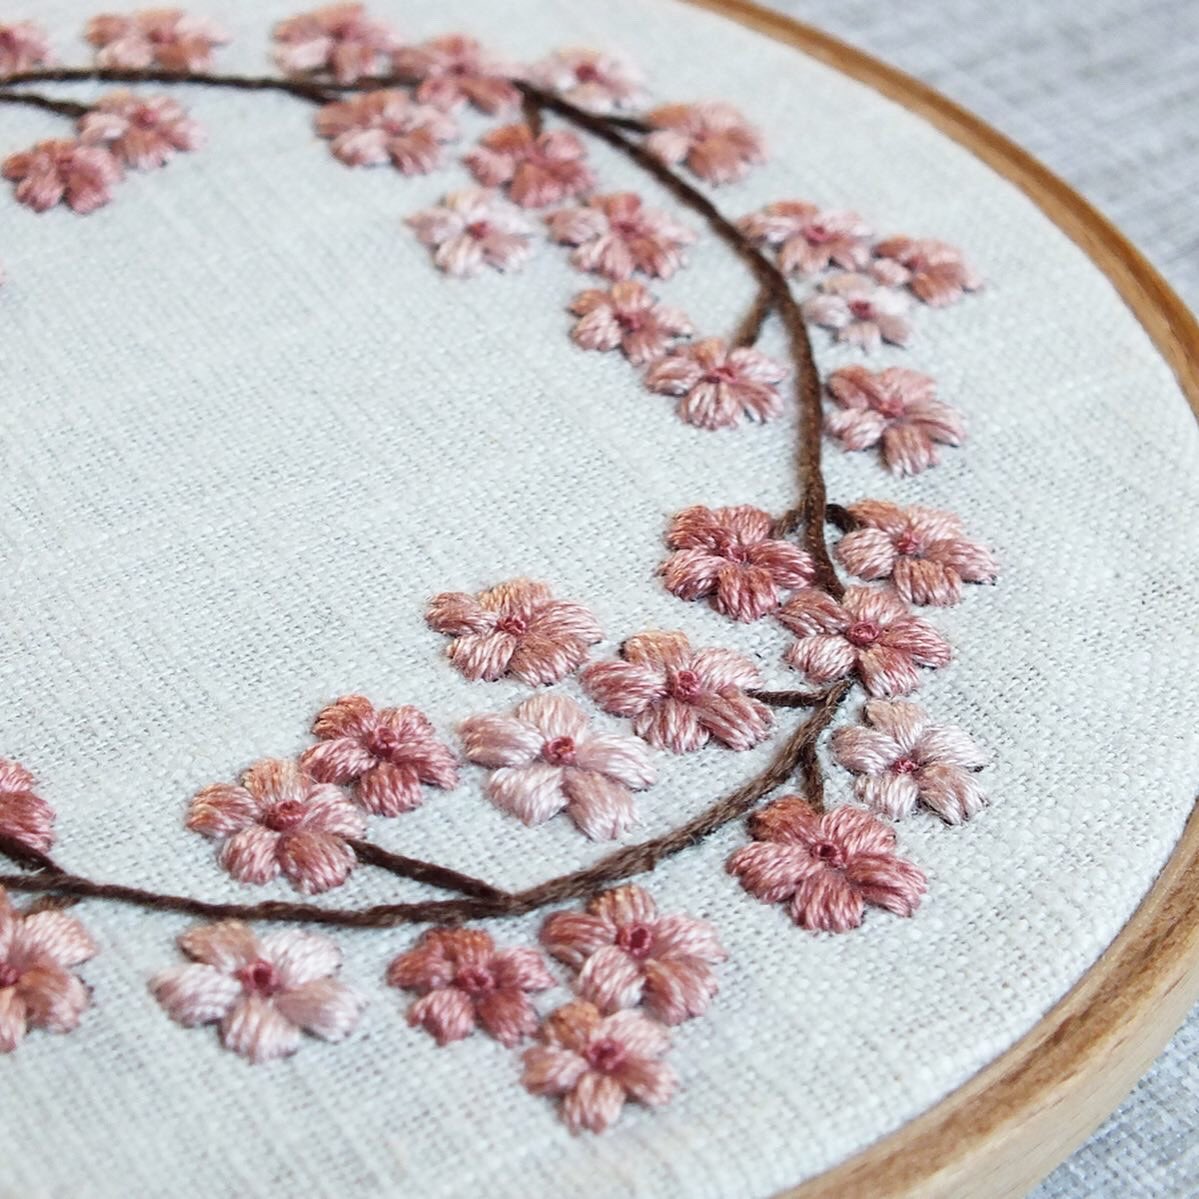 B O N N I E 🌸

The kit for Bonnie has just been launched on my Etsy shop and website 🌸

#hannahburburydesigns #blossomcollection #blossomflowers #blossom #blossomembroidery #blossomlove #embroiderypattern #handembroidery #embroideryhoop #hoopart #shopsmall #embroiderykit